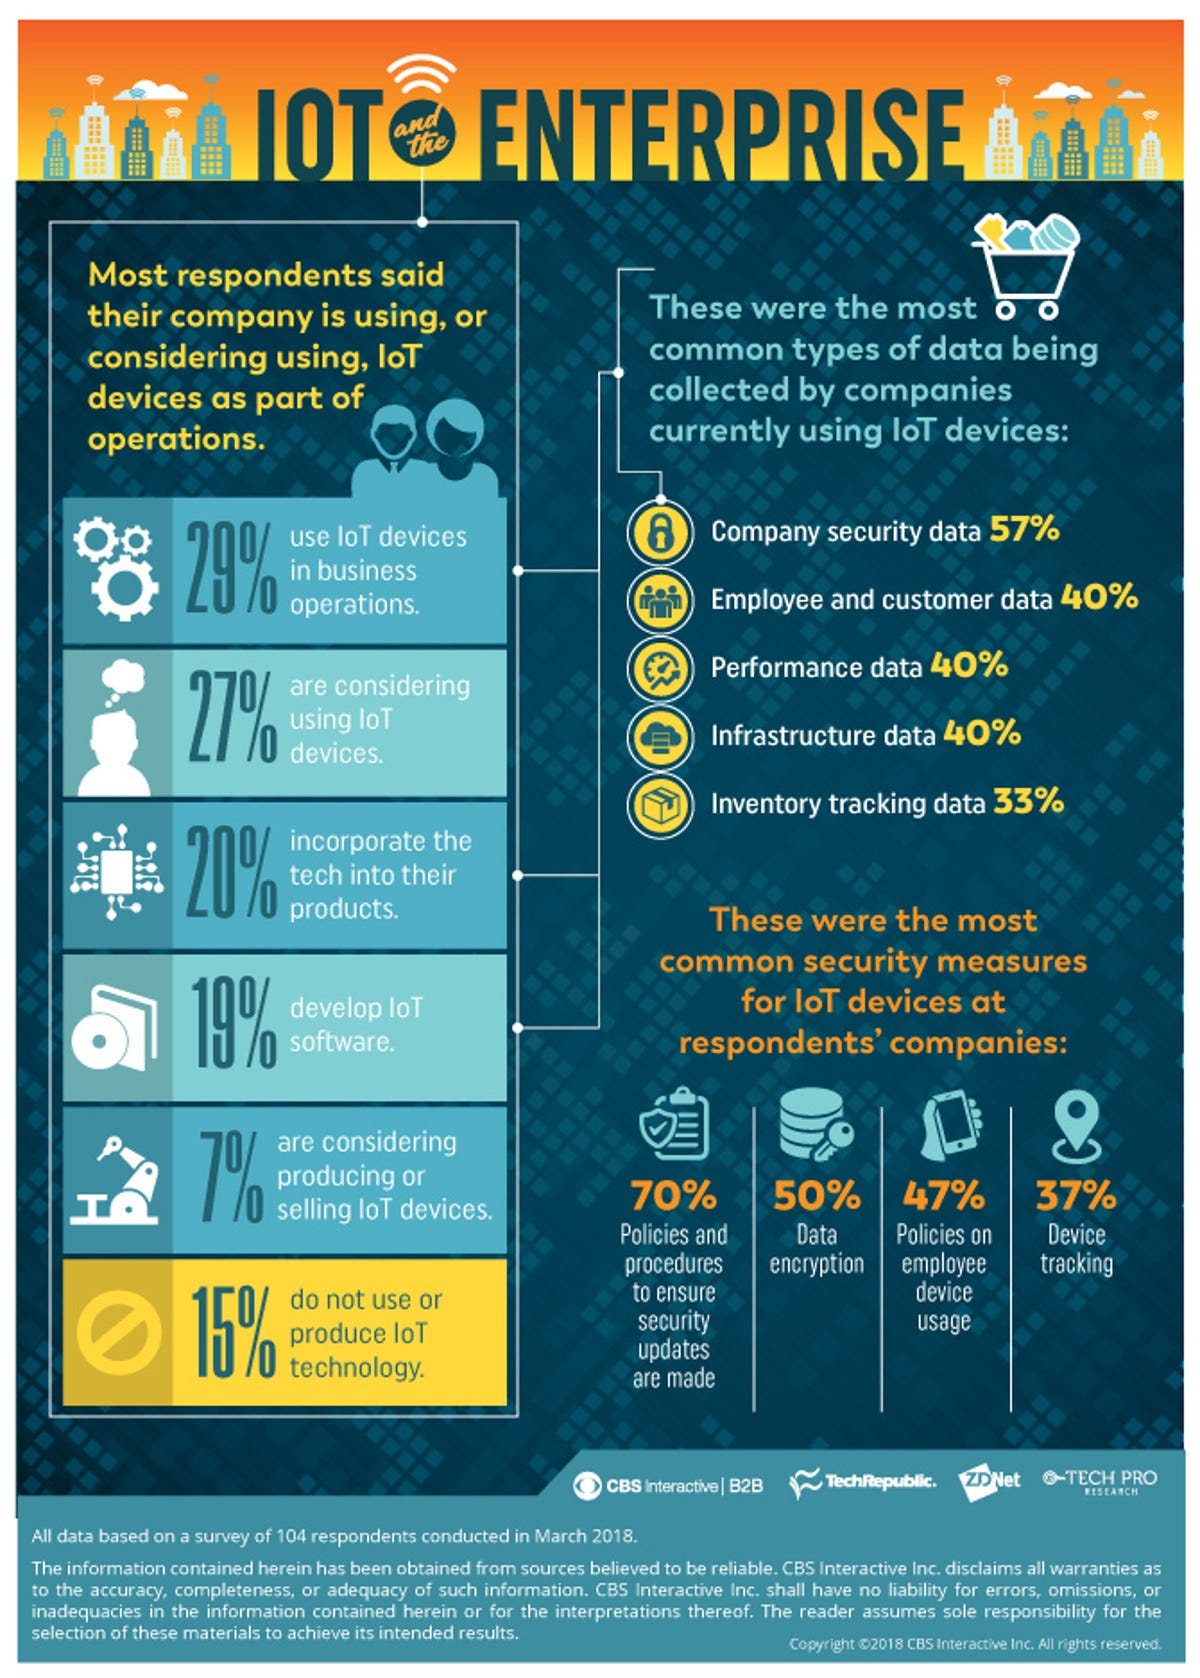 Infographic showing data from IoT survey